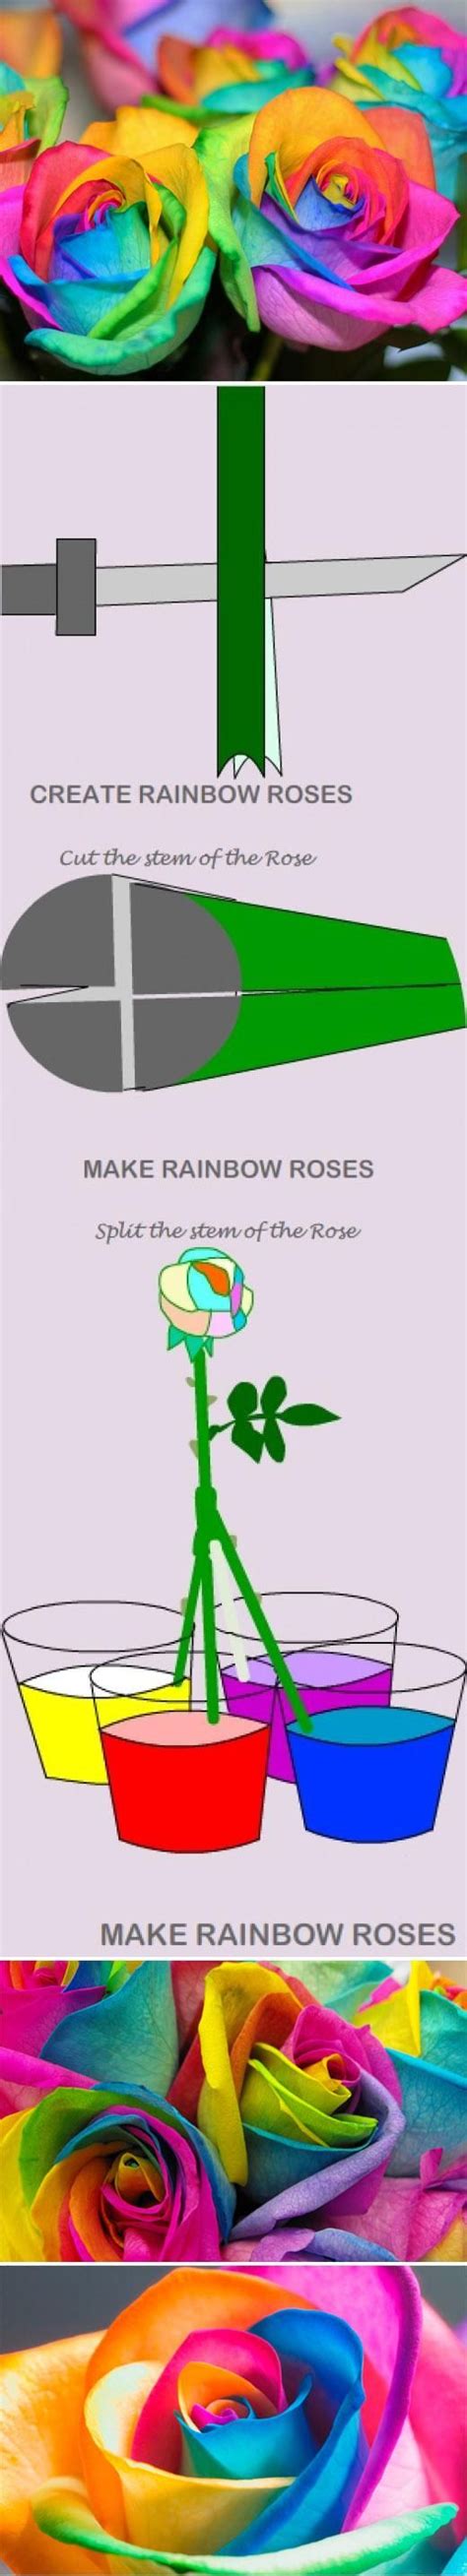 How To Make Rainbow Roses A Step By Step Handy Diy Rainbow Roses